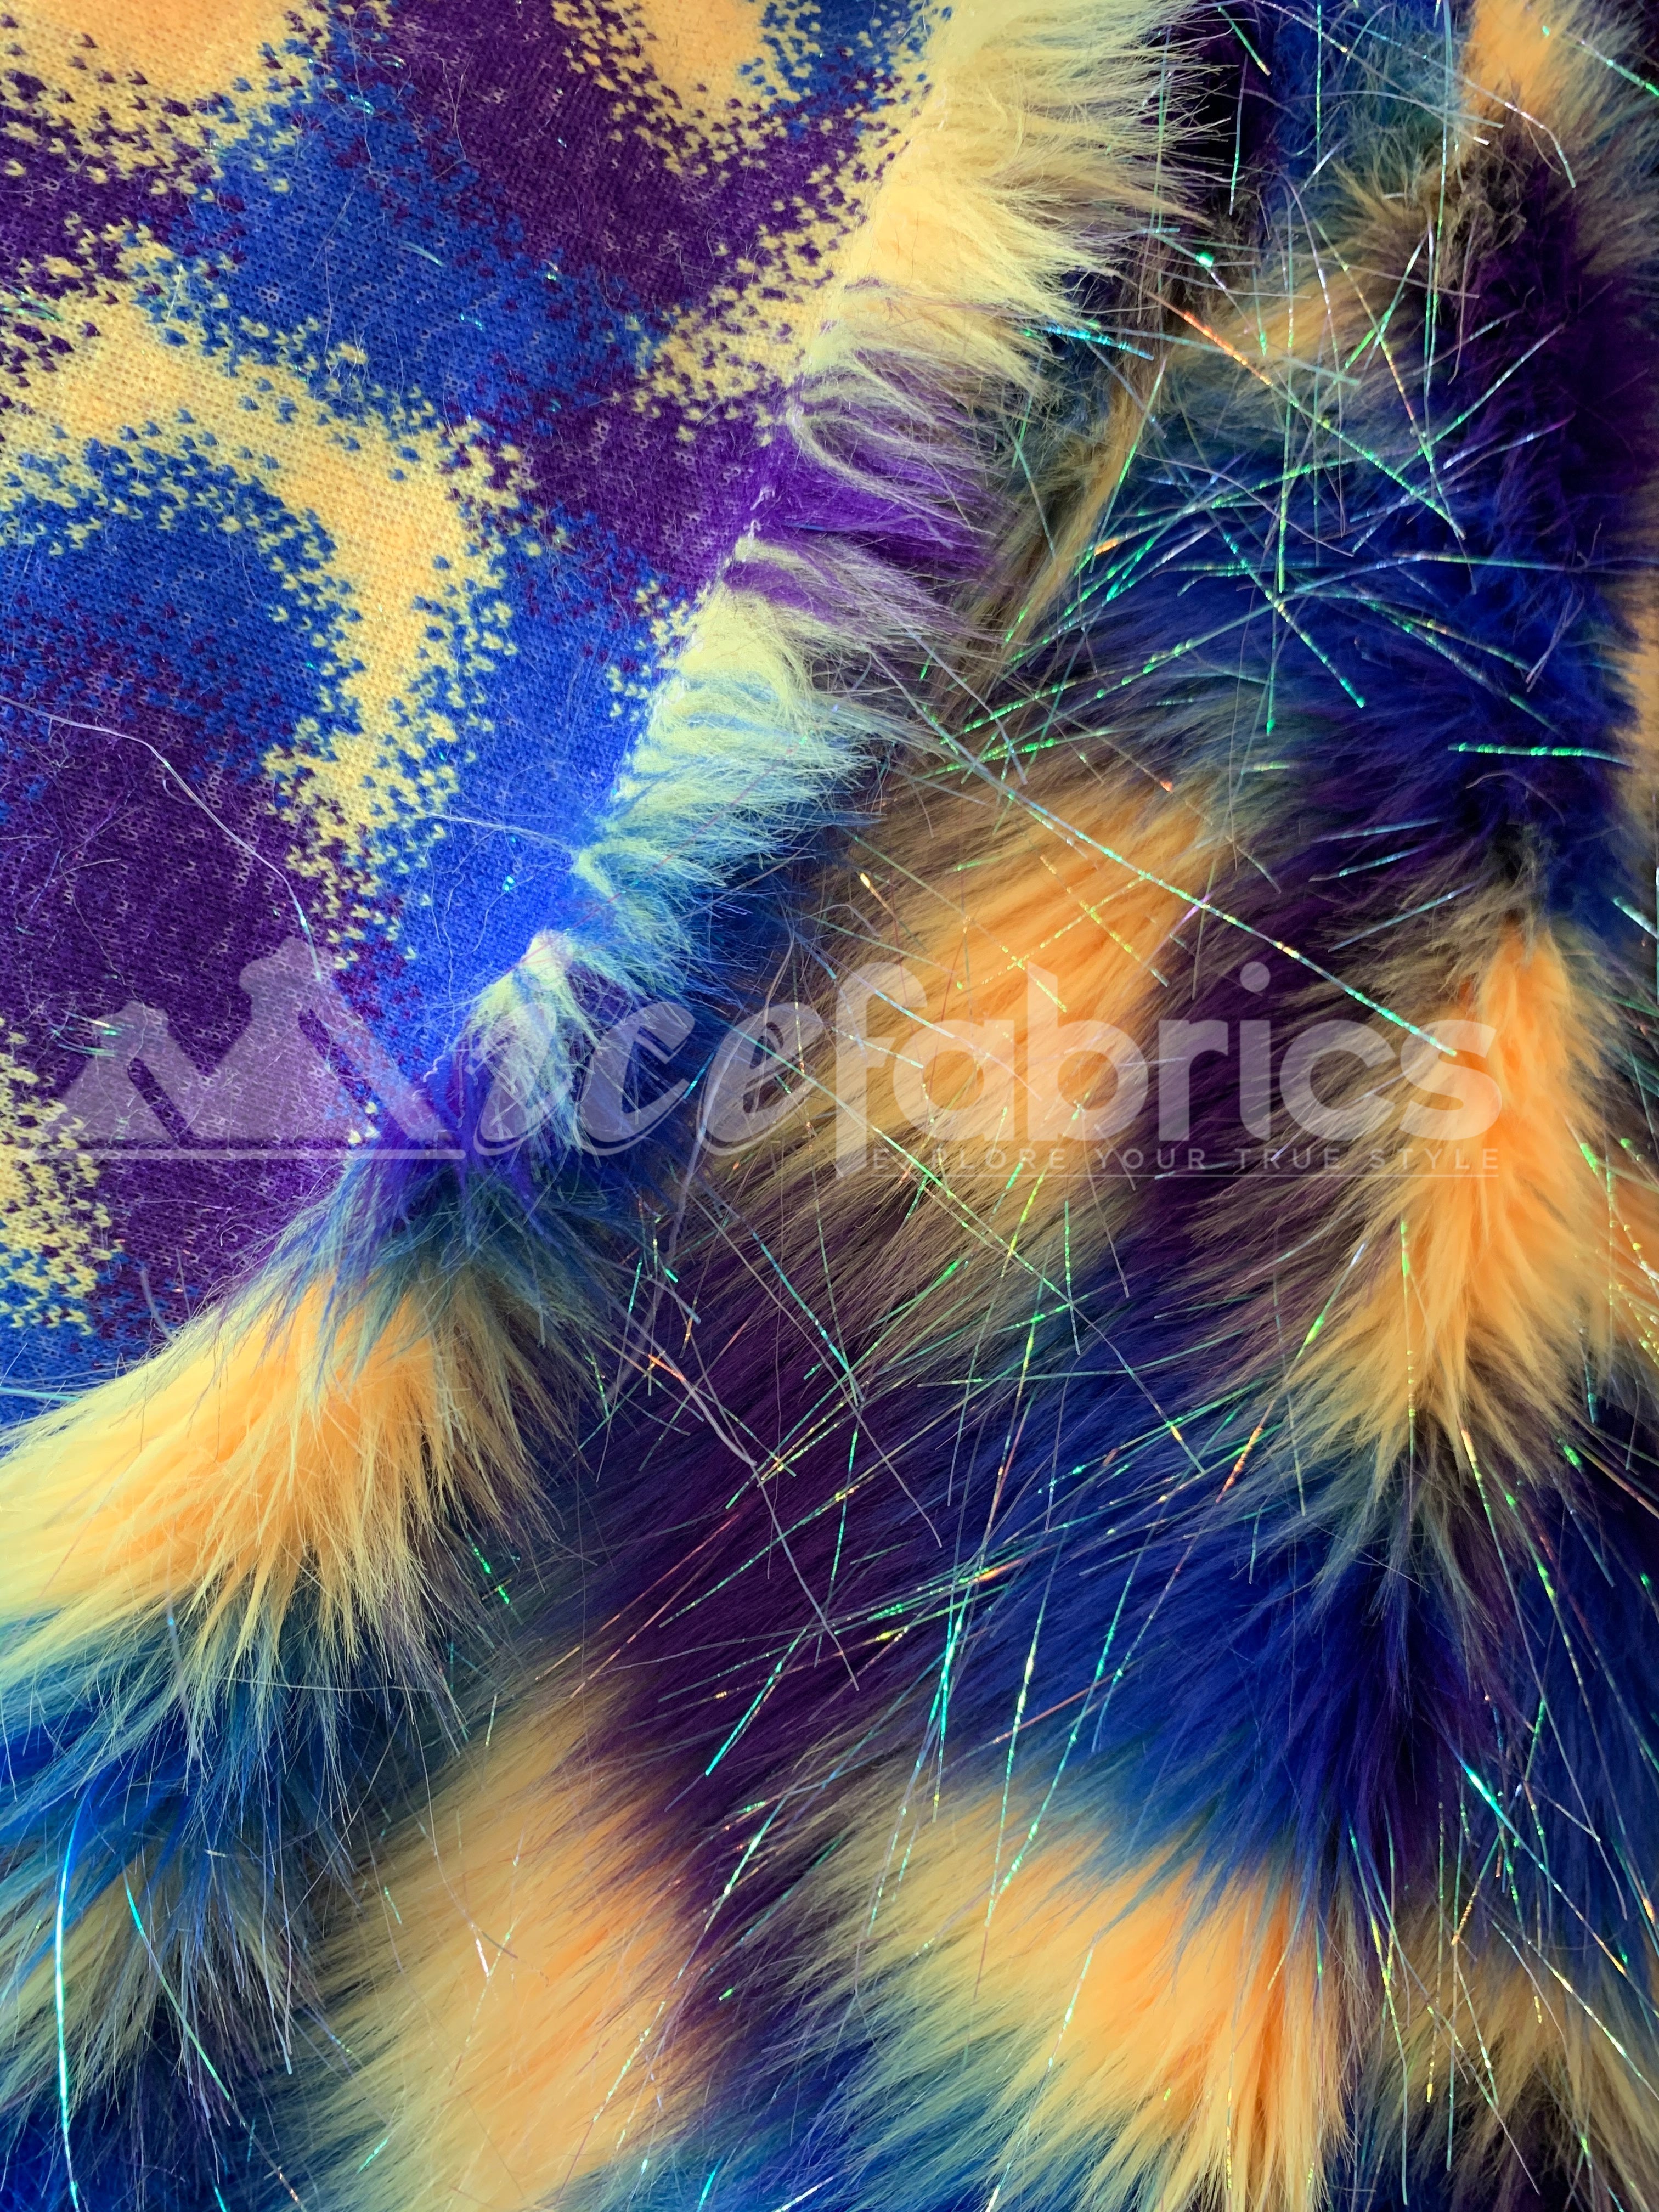 3 Tone Rainbow Tinsel 3.5" long Pile Blue, Yellow, and Purple Faux Fur Fabric By The YardICEFABRICICE FABRICSBy The Yard (60 inches Wide)3 Tone Rainbow Tinsel 3.5" long Pile Blue, Yellow, and Purple Faux Fur Fabric By The Yard ICEFABRIC